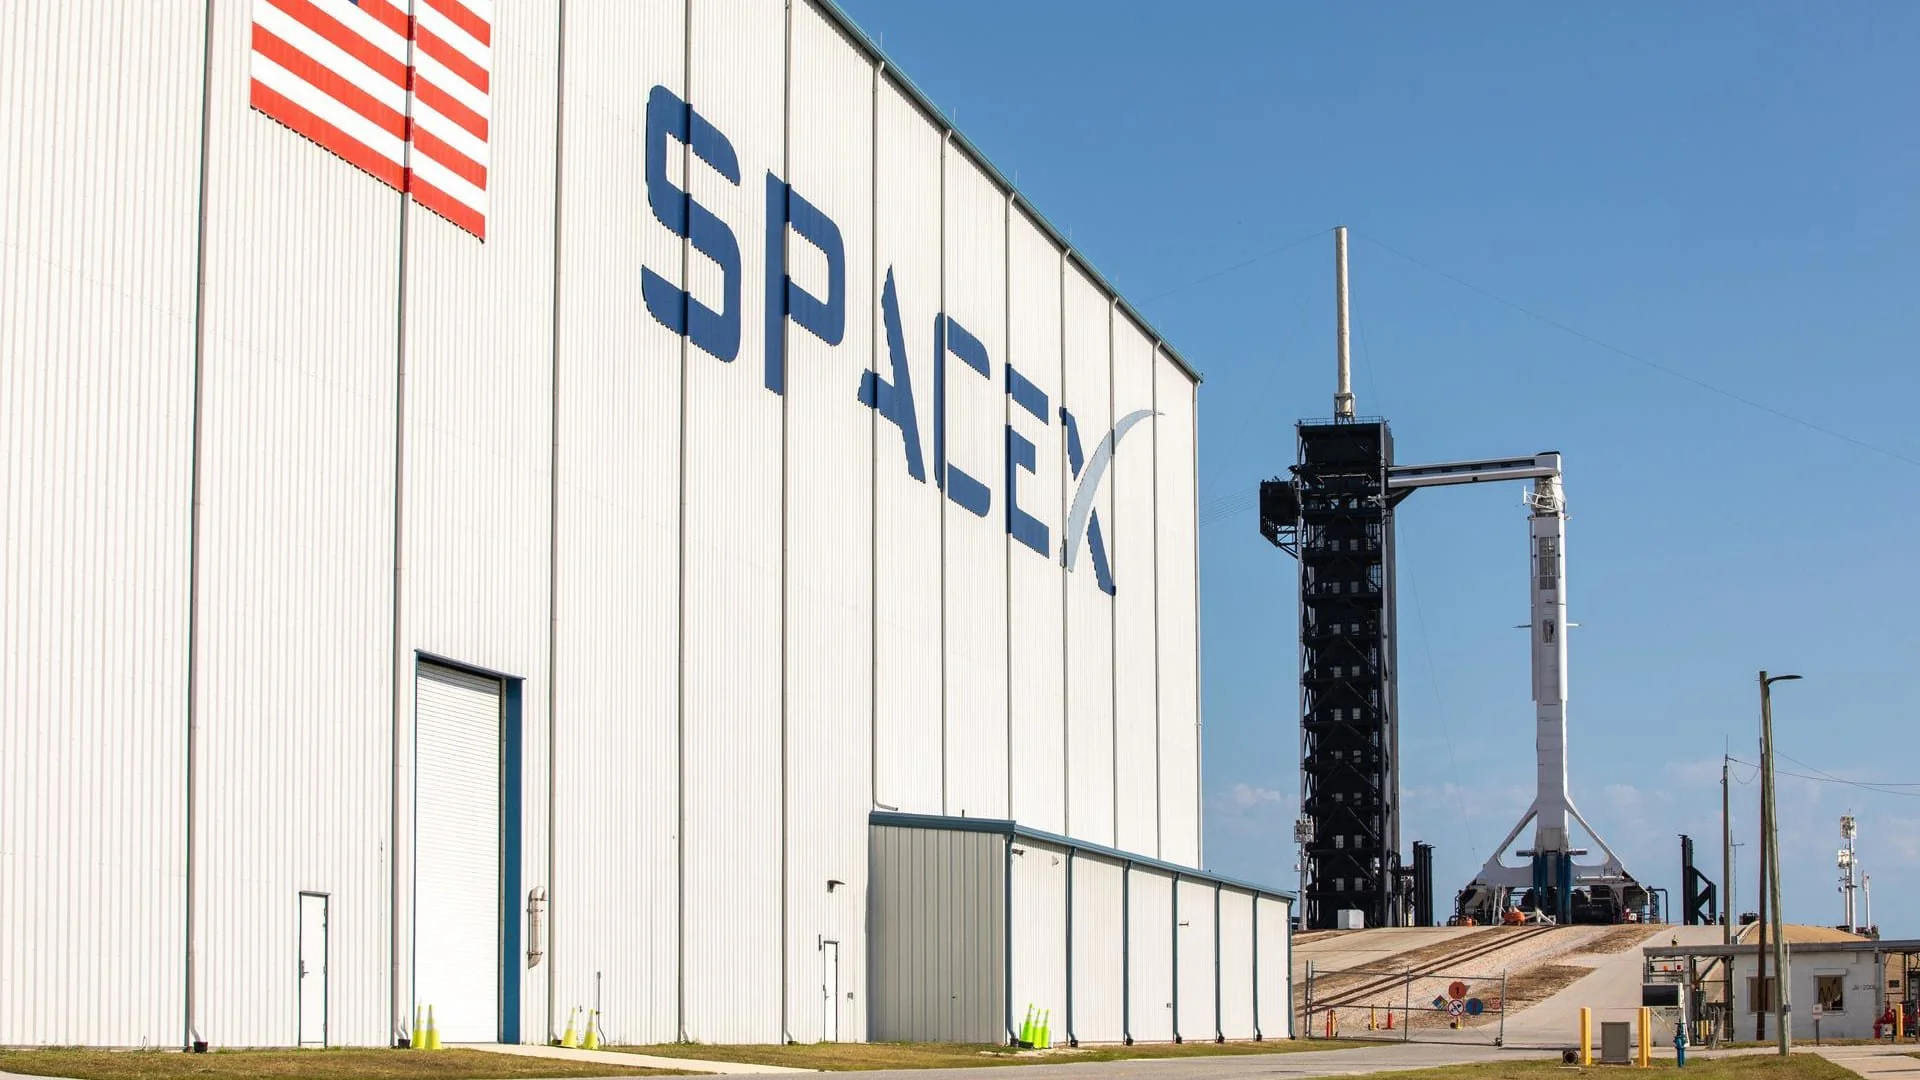 Elon Musk's SpaceX in Hot Water: Employees Cry Foul Over Gender Bias and Unfair Firings